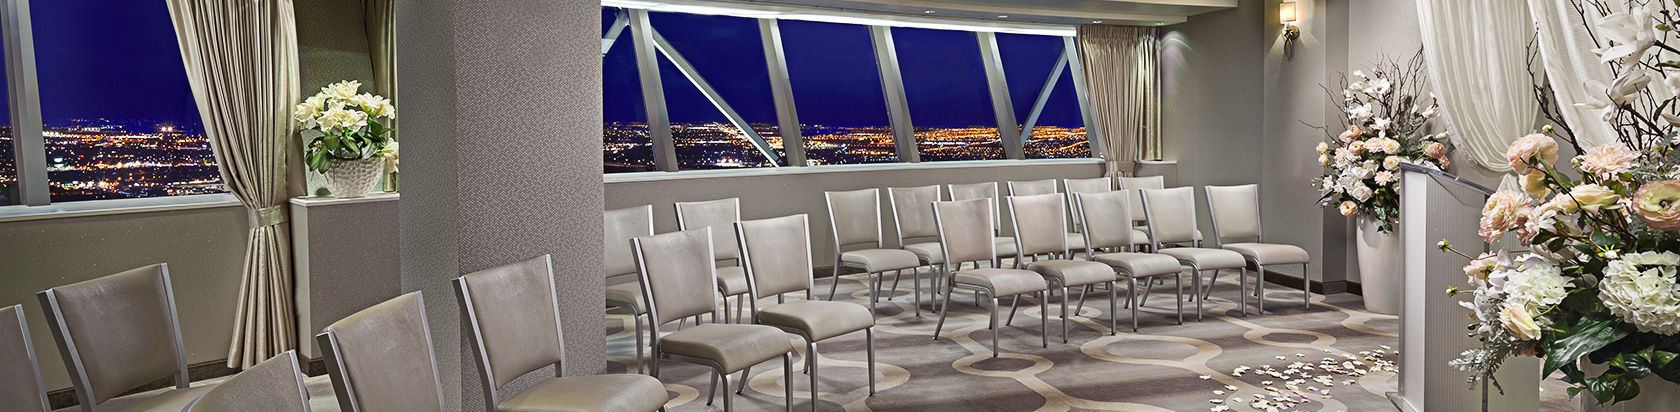 Chapel in the Clouds at the Stratosphere Hotel - 6